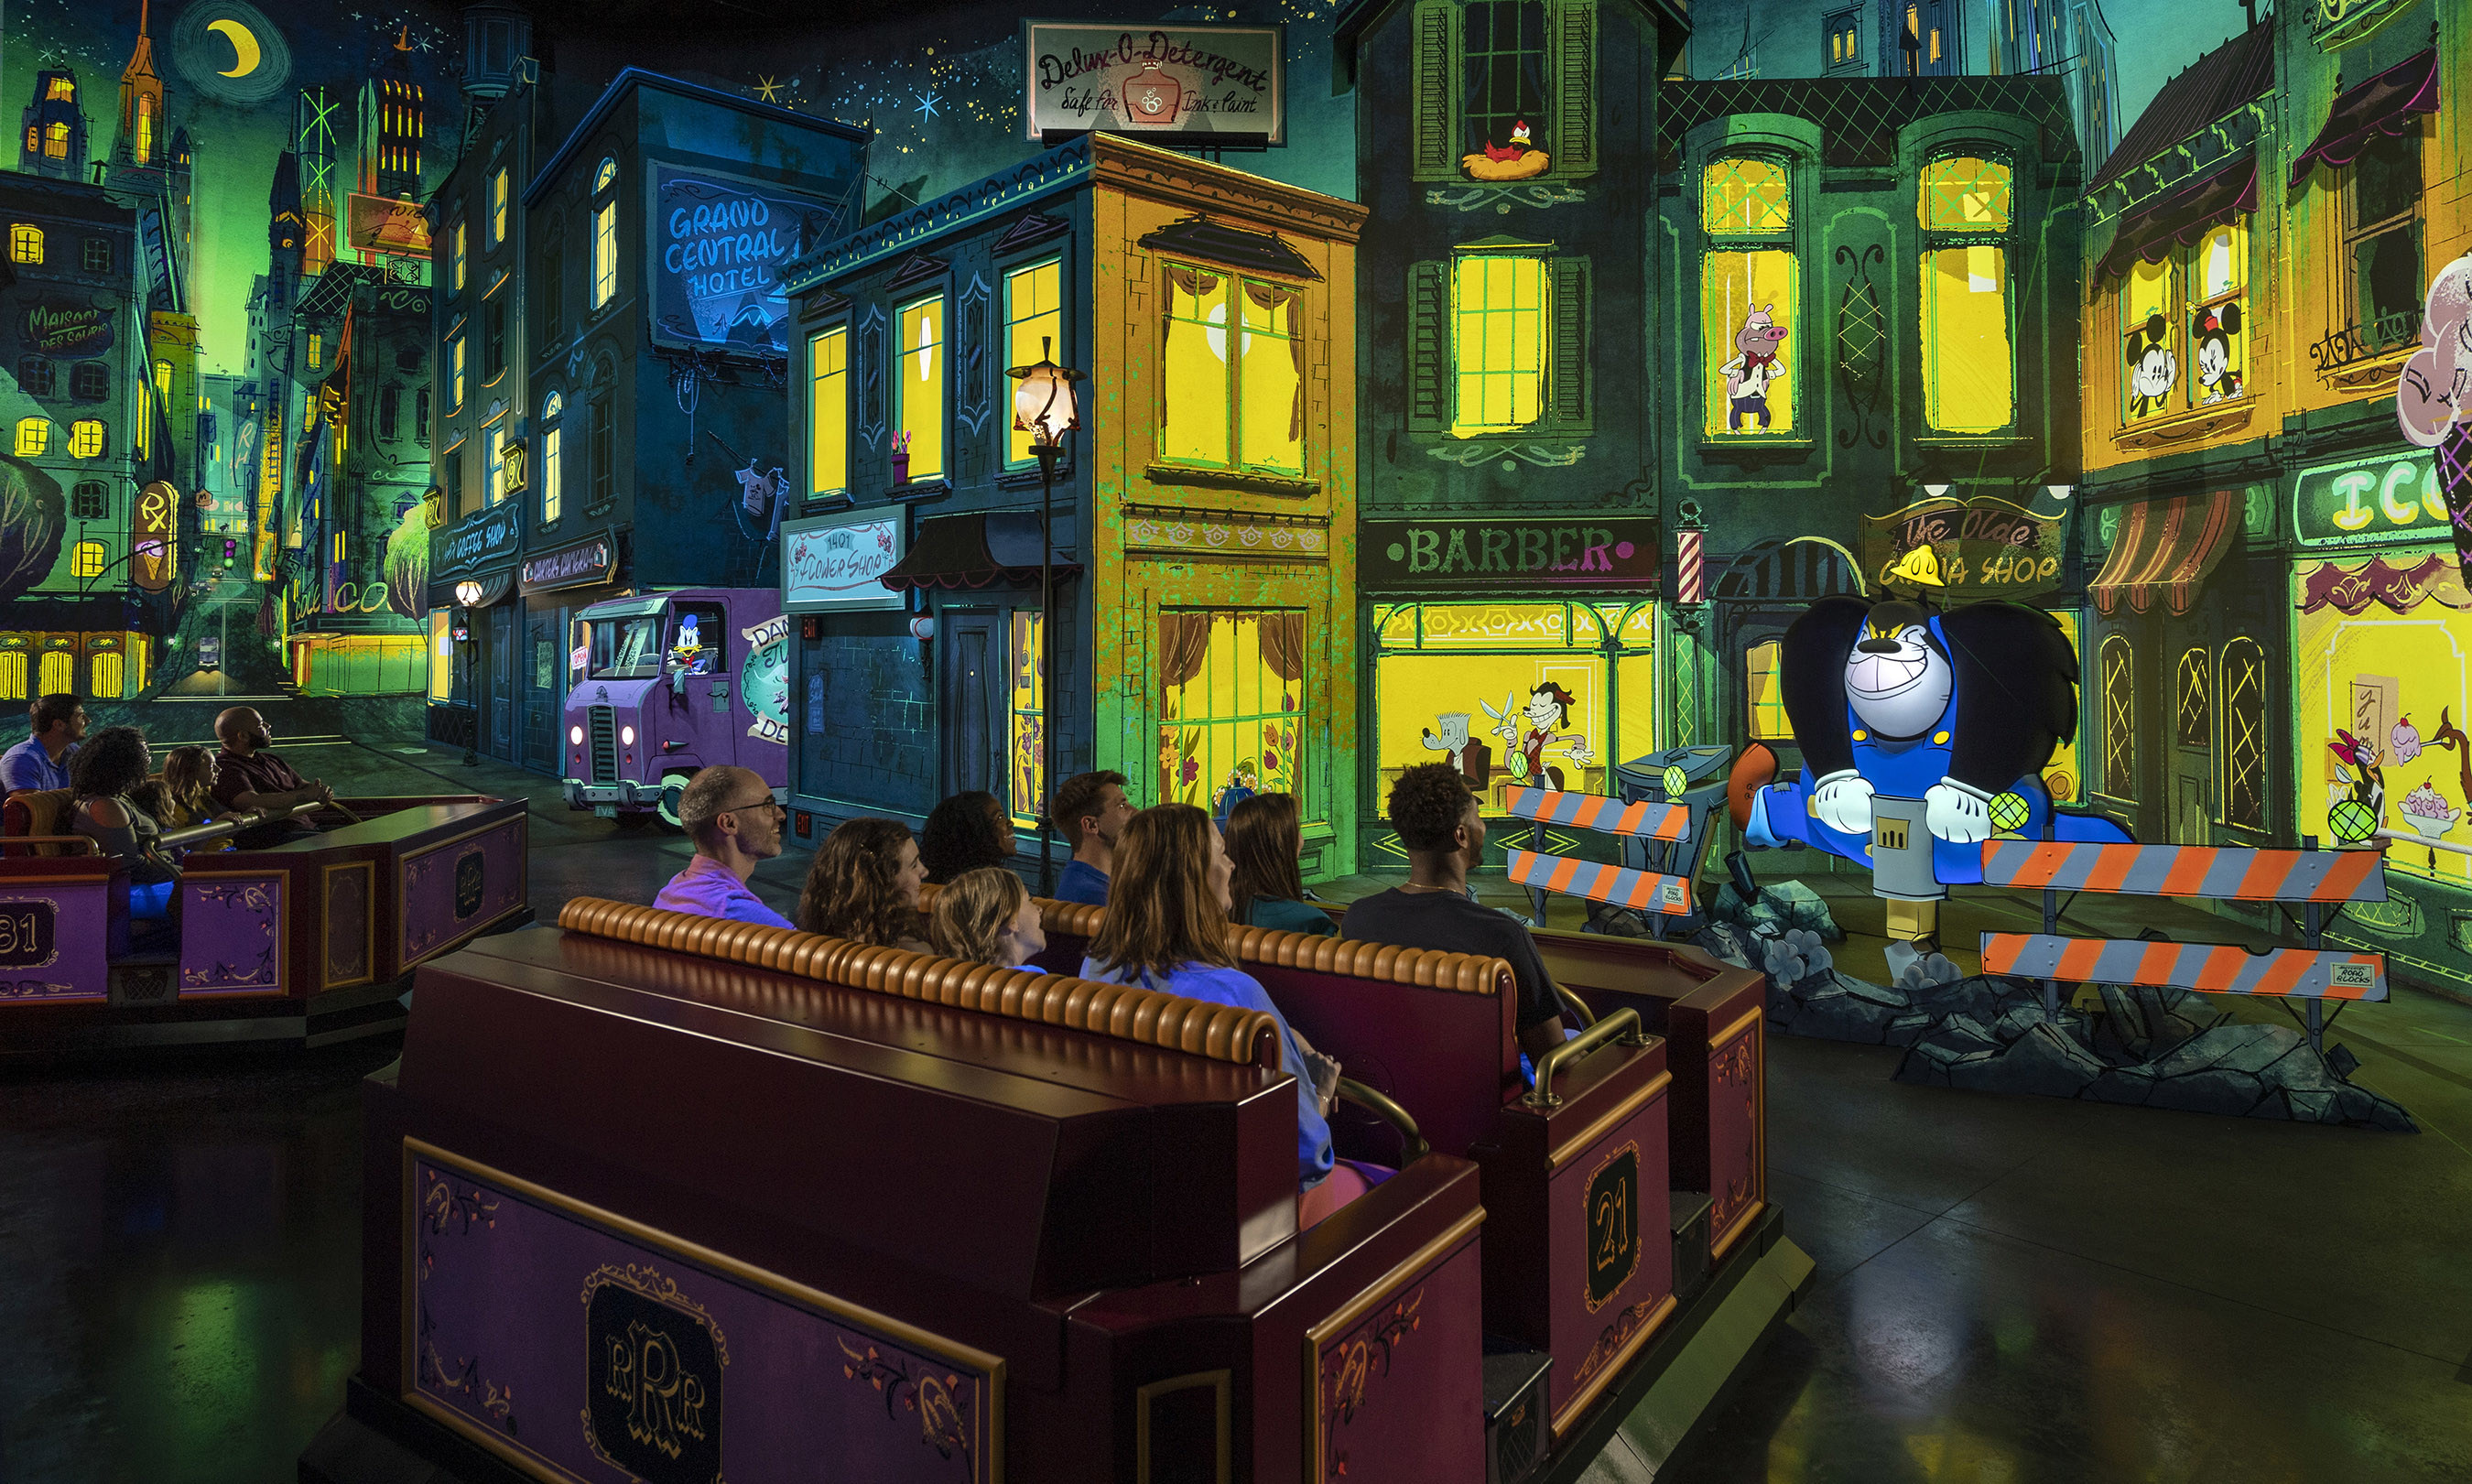 Panasonic Creates Immersive Cartoon World with First Ever Disney Ride-Through Attraction Featuring Mickey Mouse and Friends